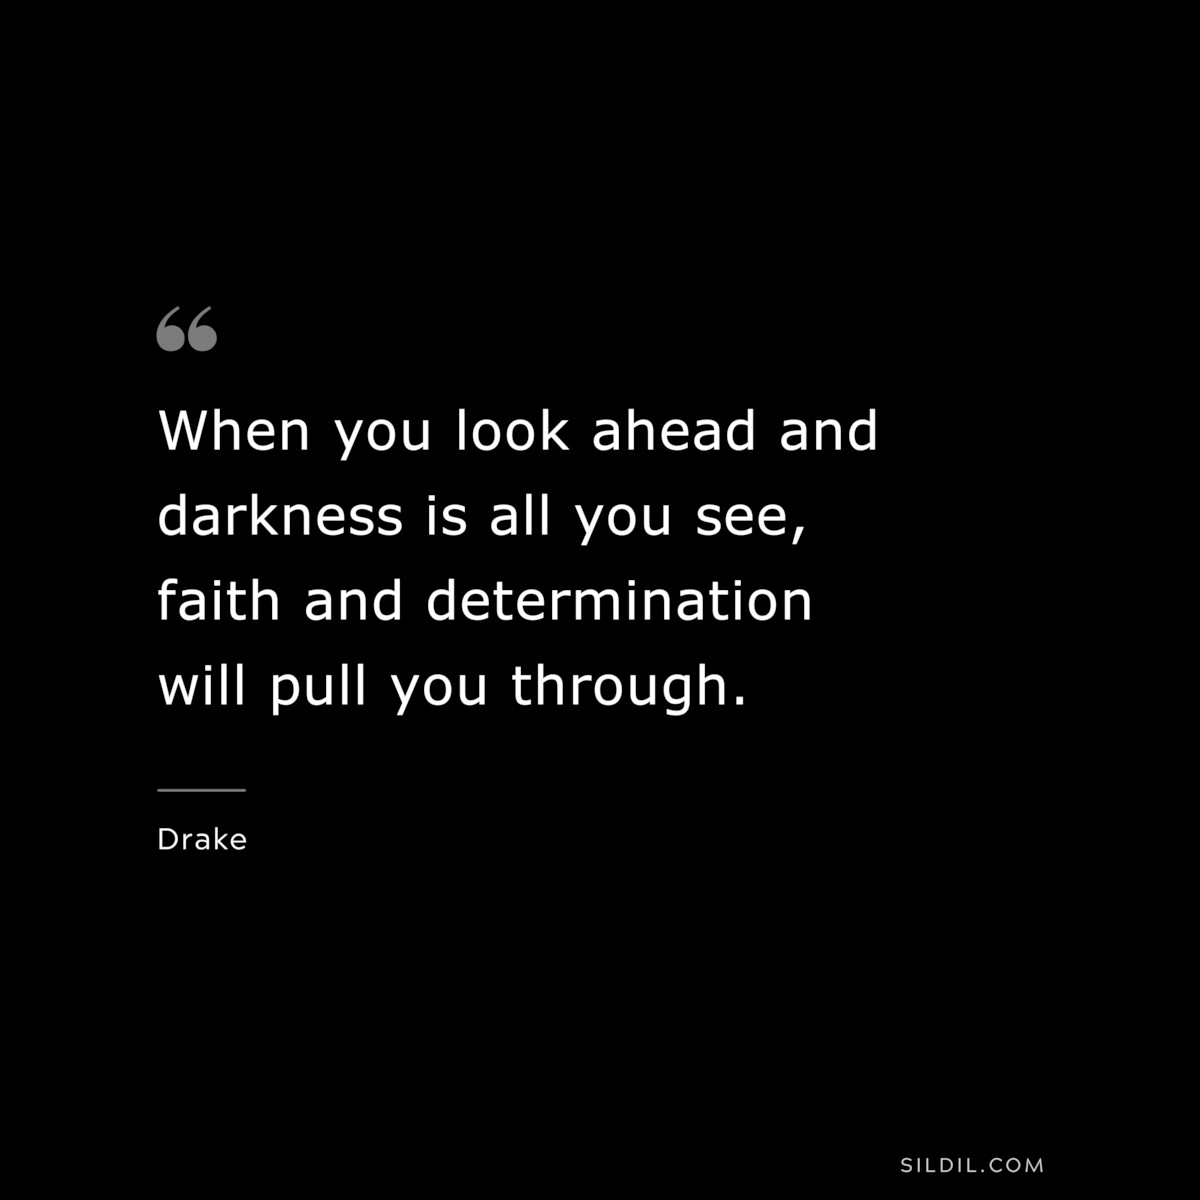 When you look ahead and darkness is all you see, faith and determination will pull you through. ― Drake